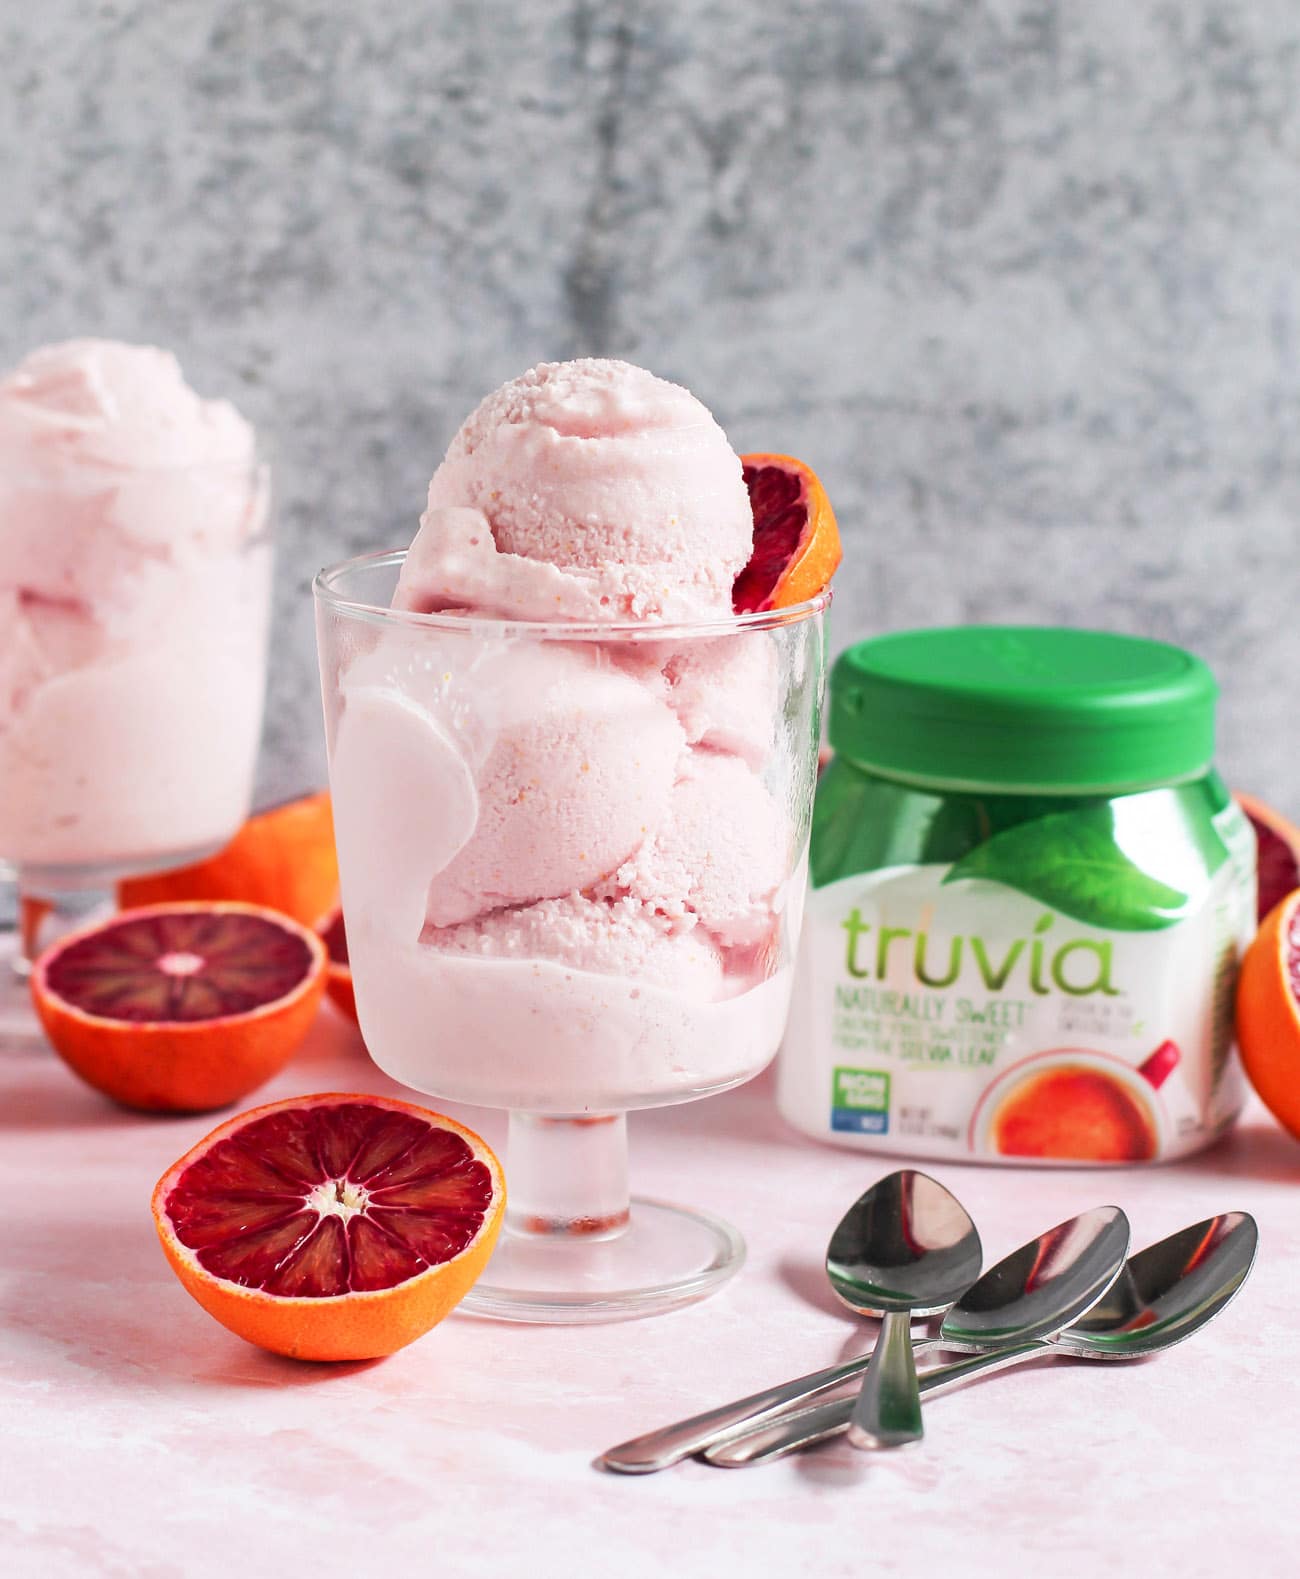 This 5-ingredient Blood Orange Ice Cream is sweet, tart, citrusy, and oh so satisfying. No need for the heavy cream, white sugar, artificial flavors, and artificial food dyes! This is the perfect ice cream to indulge in, guilt-free! Compared to store-bought ice cream, this is lower in calories, fat, and sugar, and higher in protein!